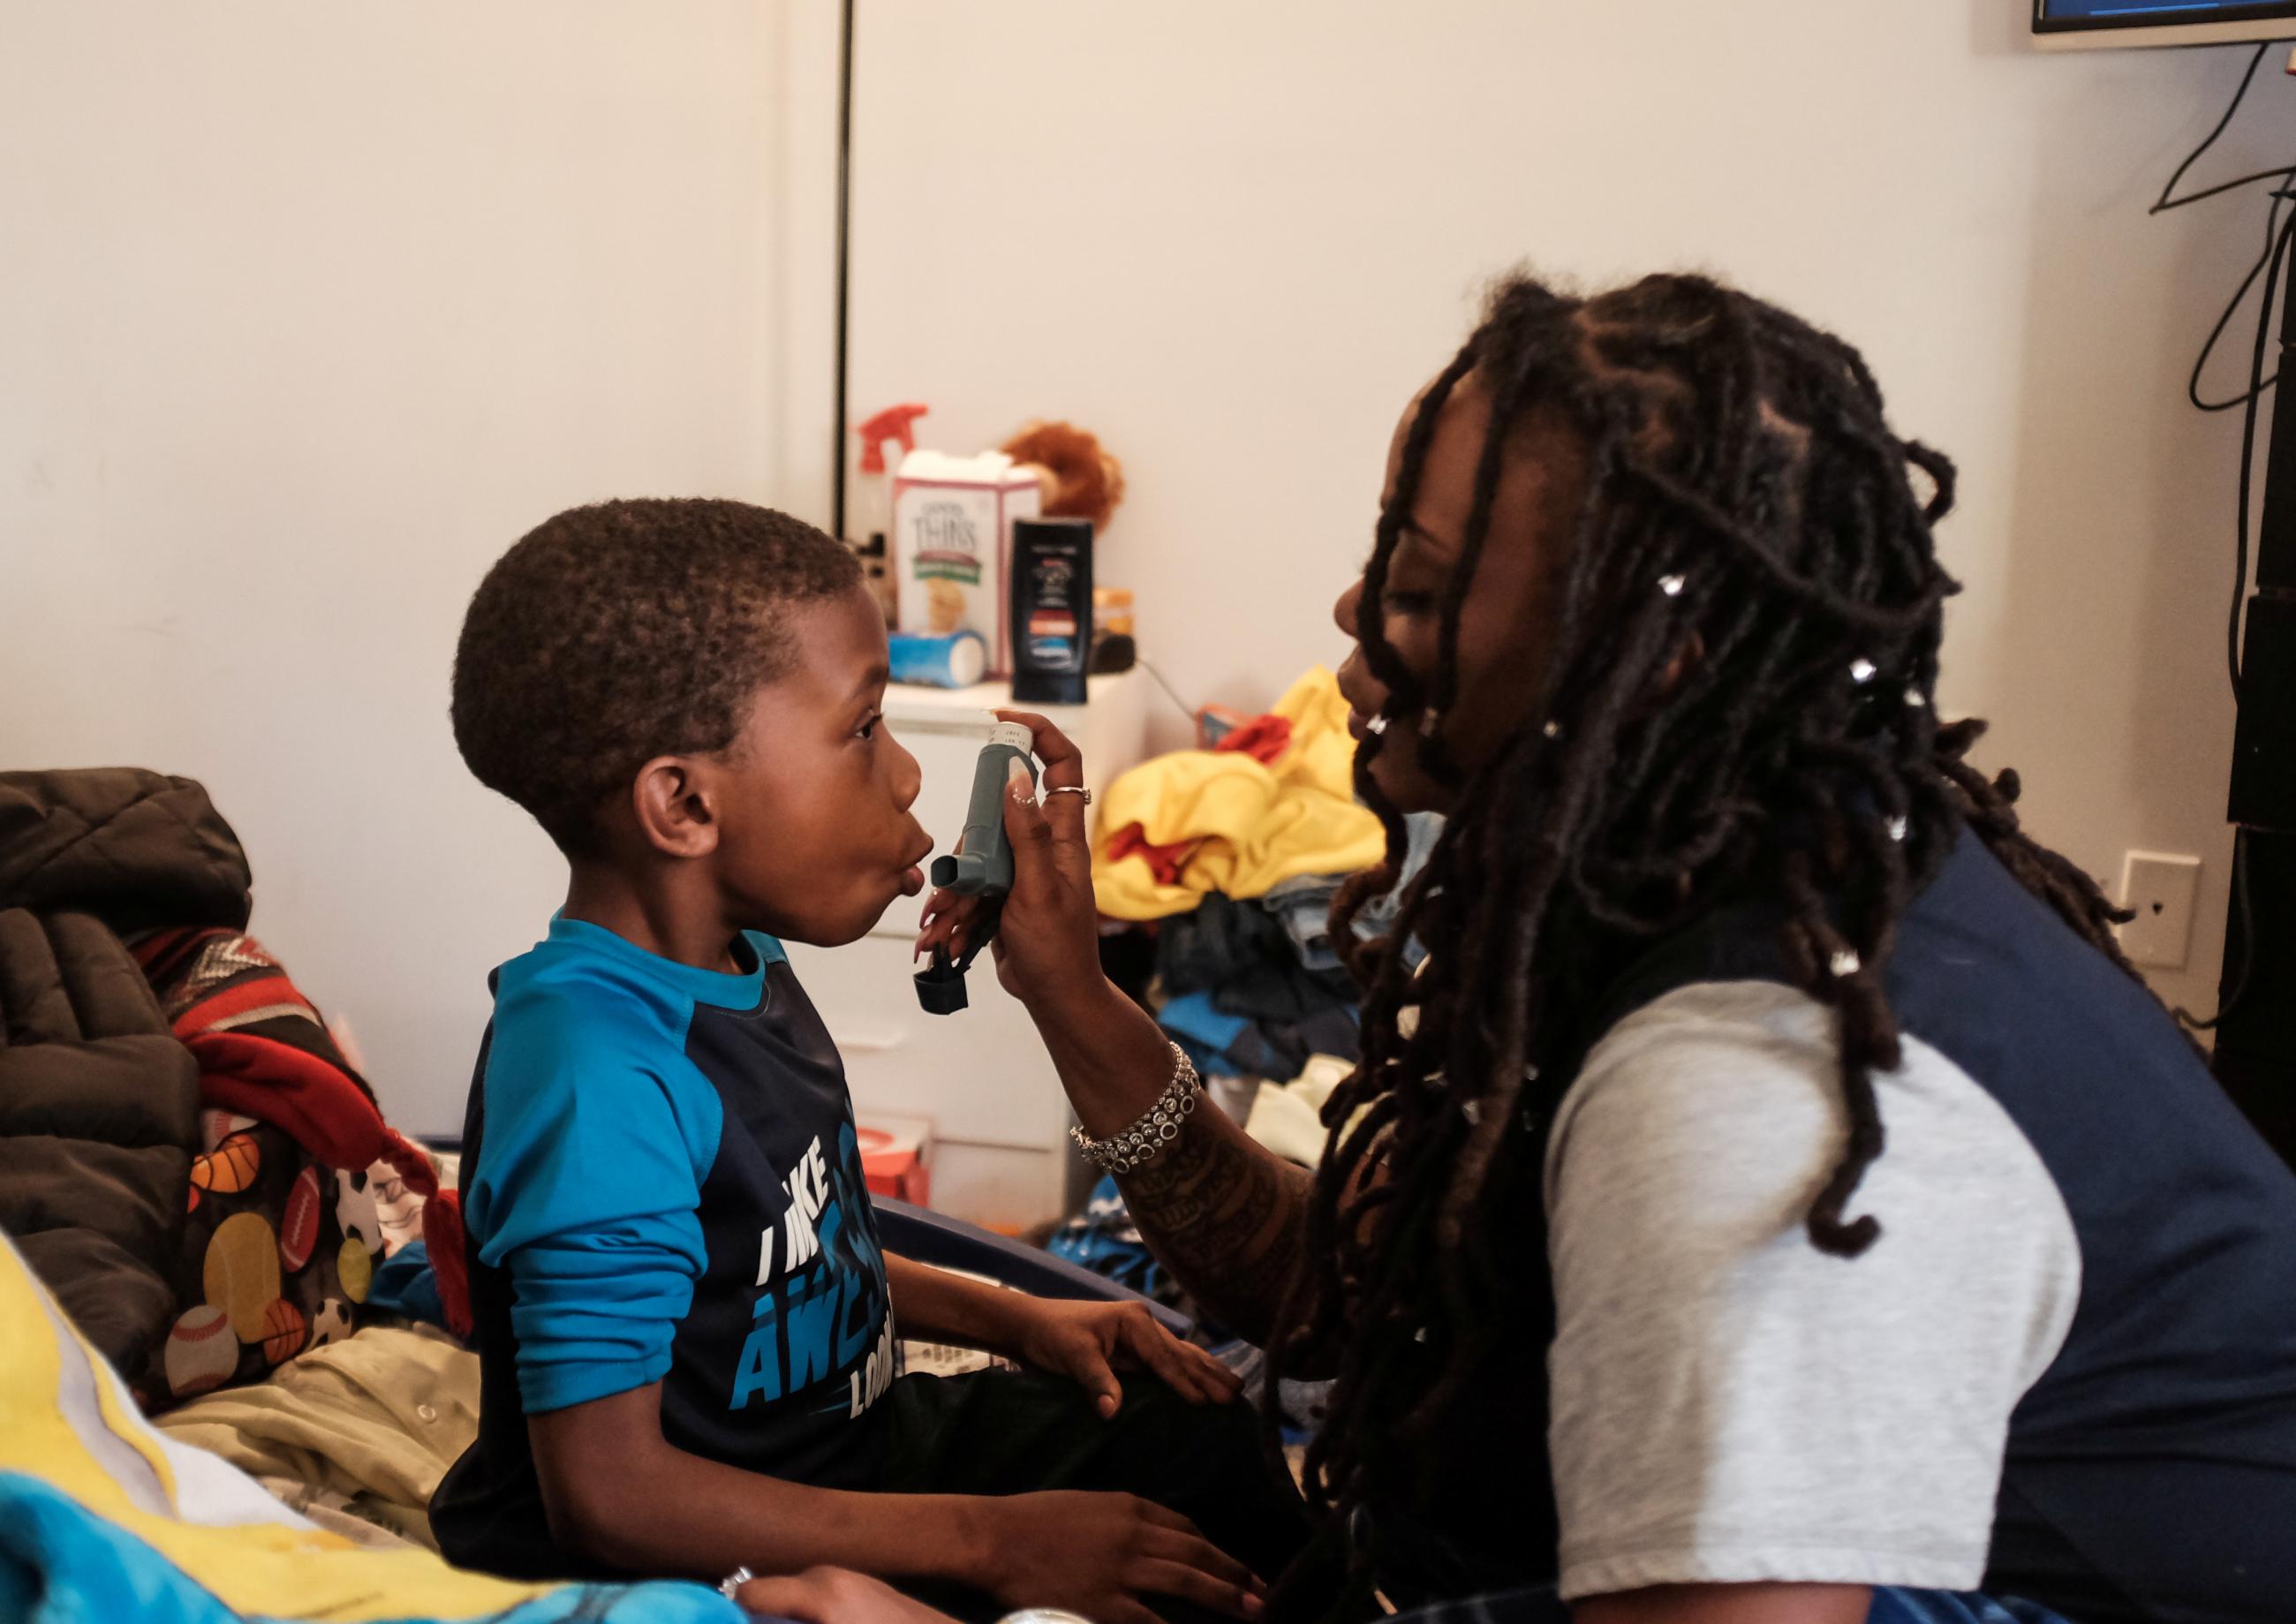 U.S. federal government contractor Yvette Hicks gives her son an asthma treatment before school on the 35th day of the partial federal government shutdown in Washington, U.S. January 25, 2019.